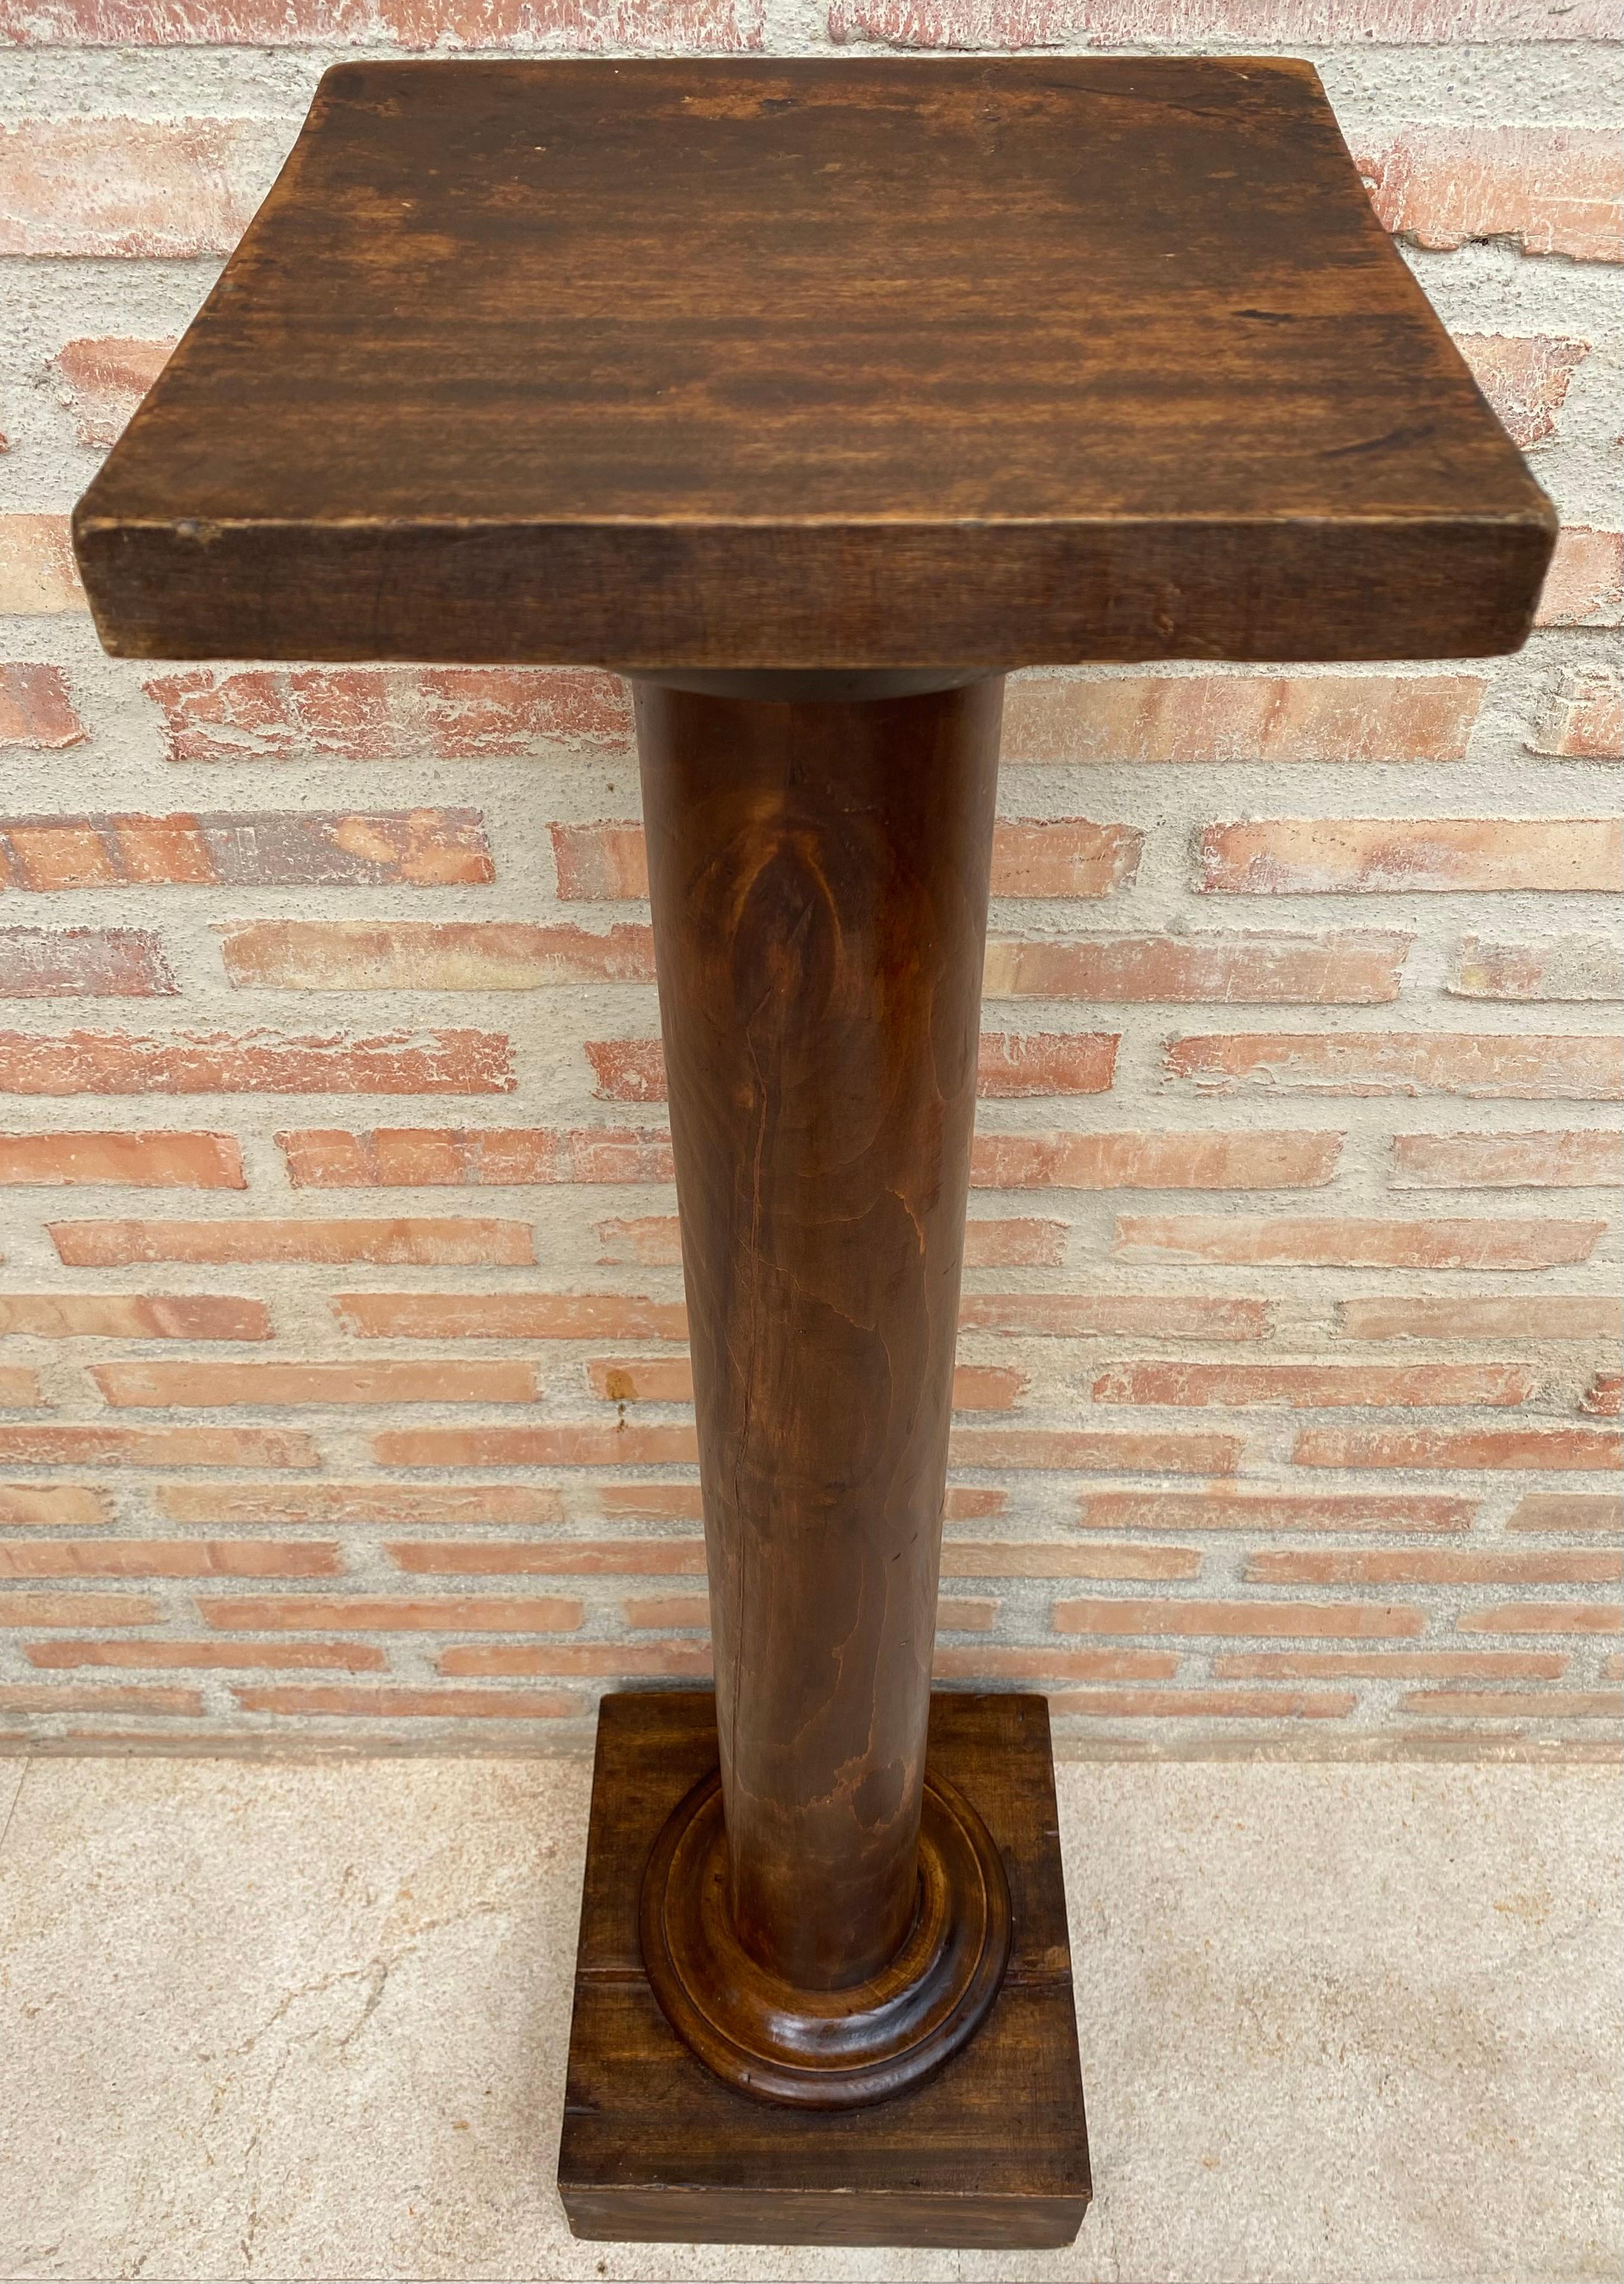 French Mid-Century Pedestal or Plant Holder Walnut Wood, circa 1960.
This plant holder or sellette is from the French Mid-Century period.
It has been made in walnut wood.